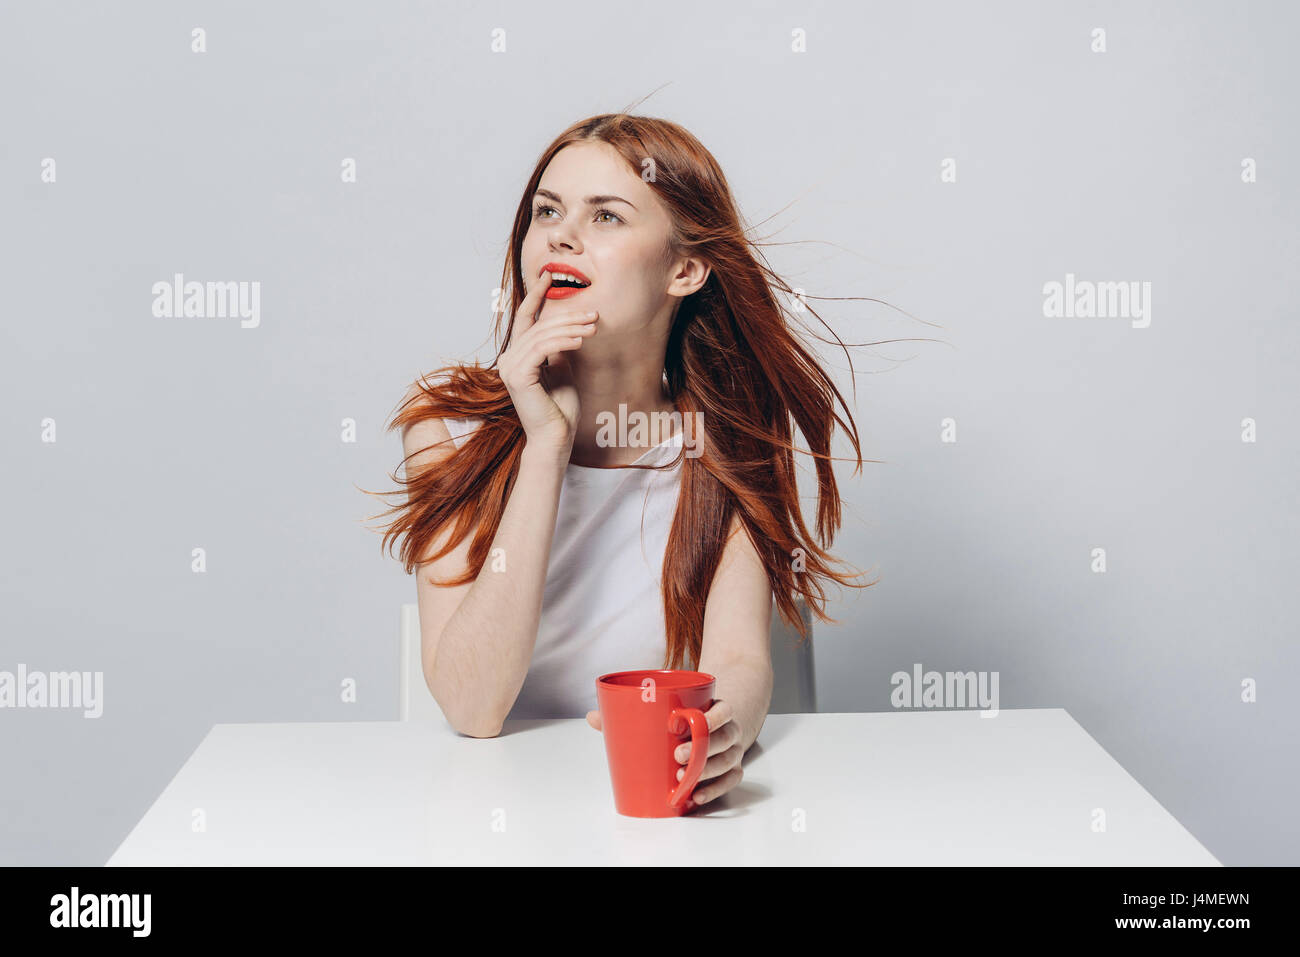 Pensive Caucasian woman sitting at windy table holding red cup Stock Photo